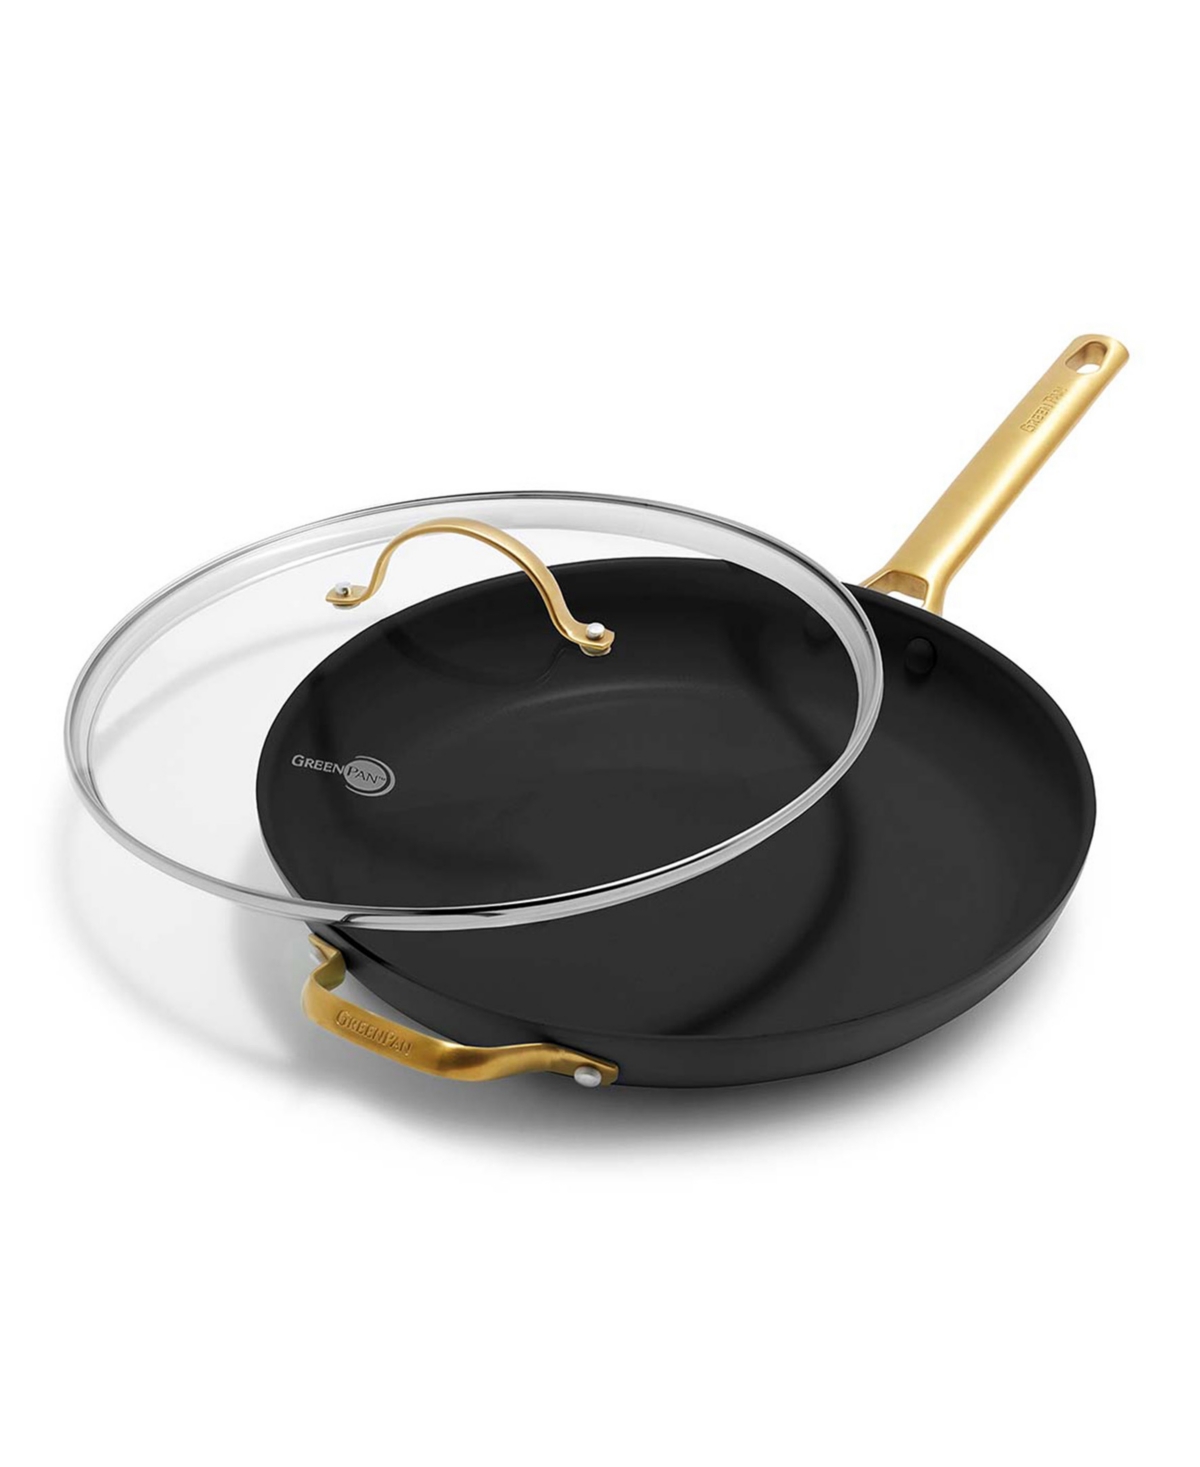 Greenpan Reserve Hard Anodized Healthy Ceramic Nonstick 12" Frying Pan Skillet With Helper Handle And Lid In Black